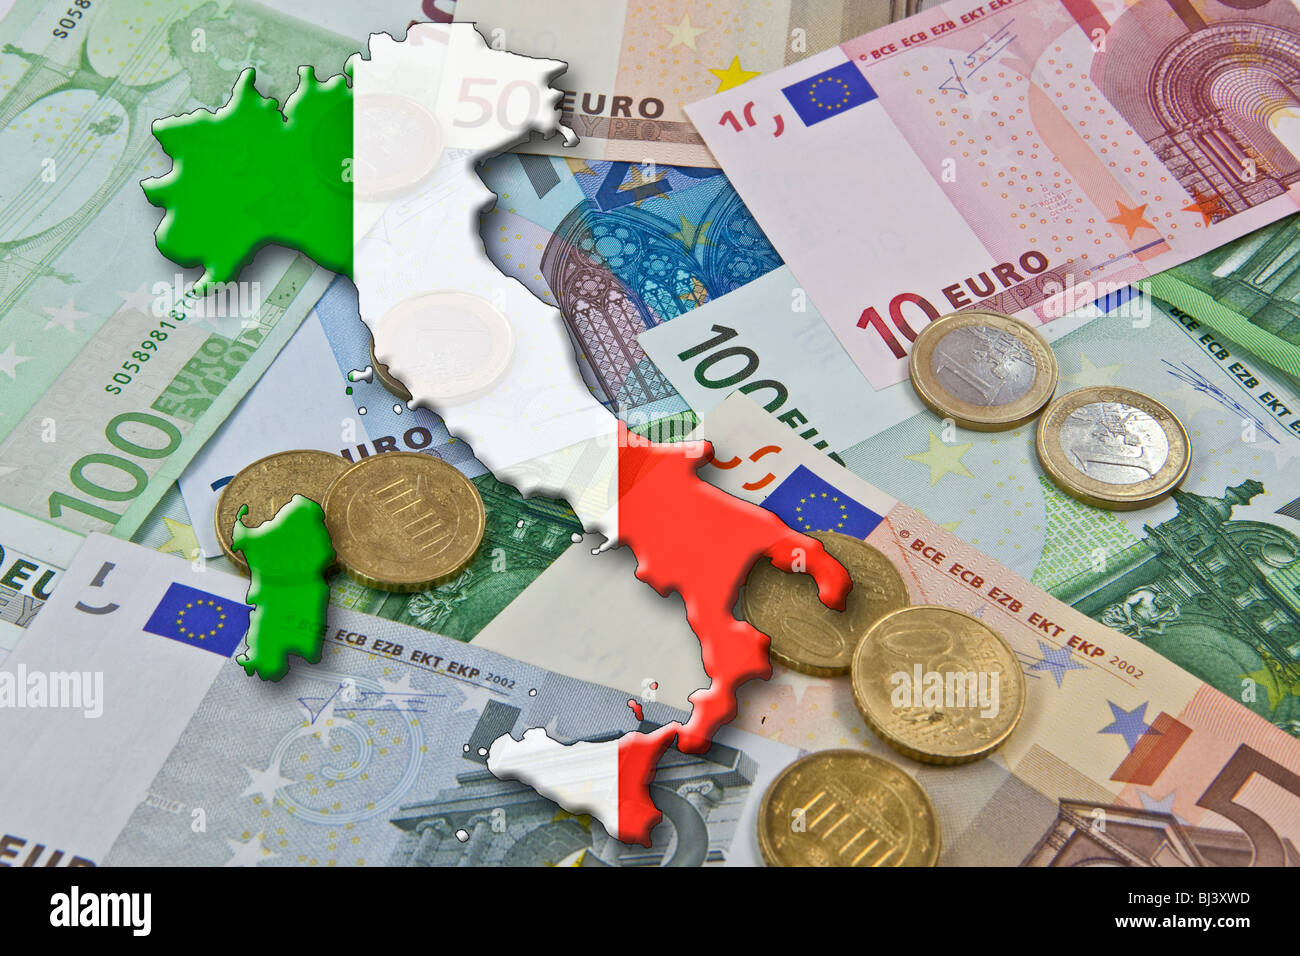 Euro and Italy, euro stability pact, Italy as a euro 'deficit sinner' Stock Photo